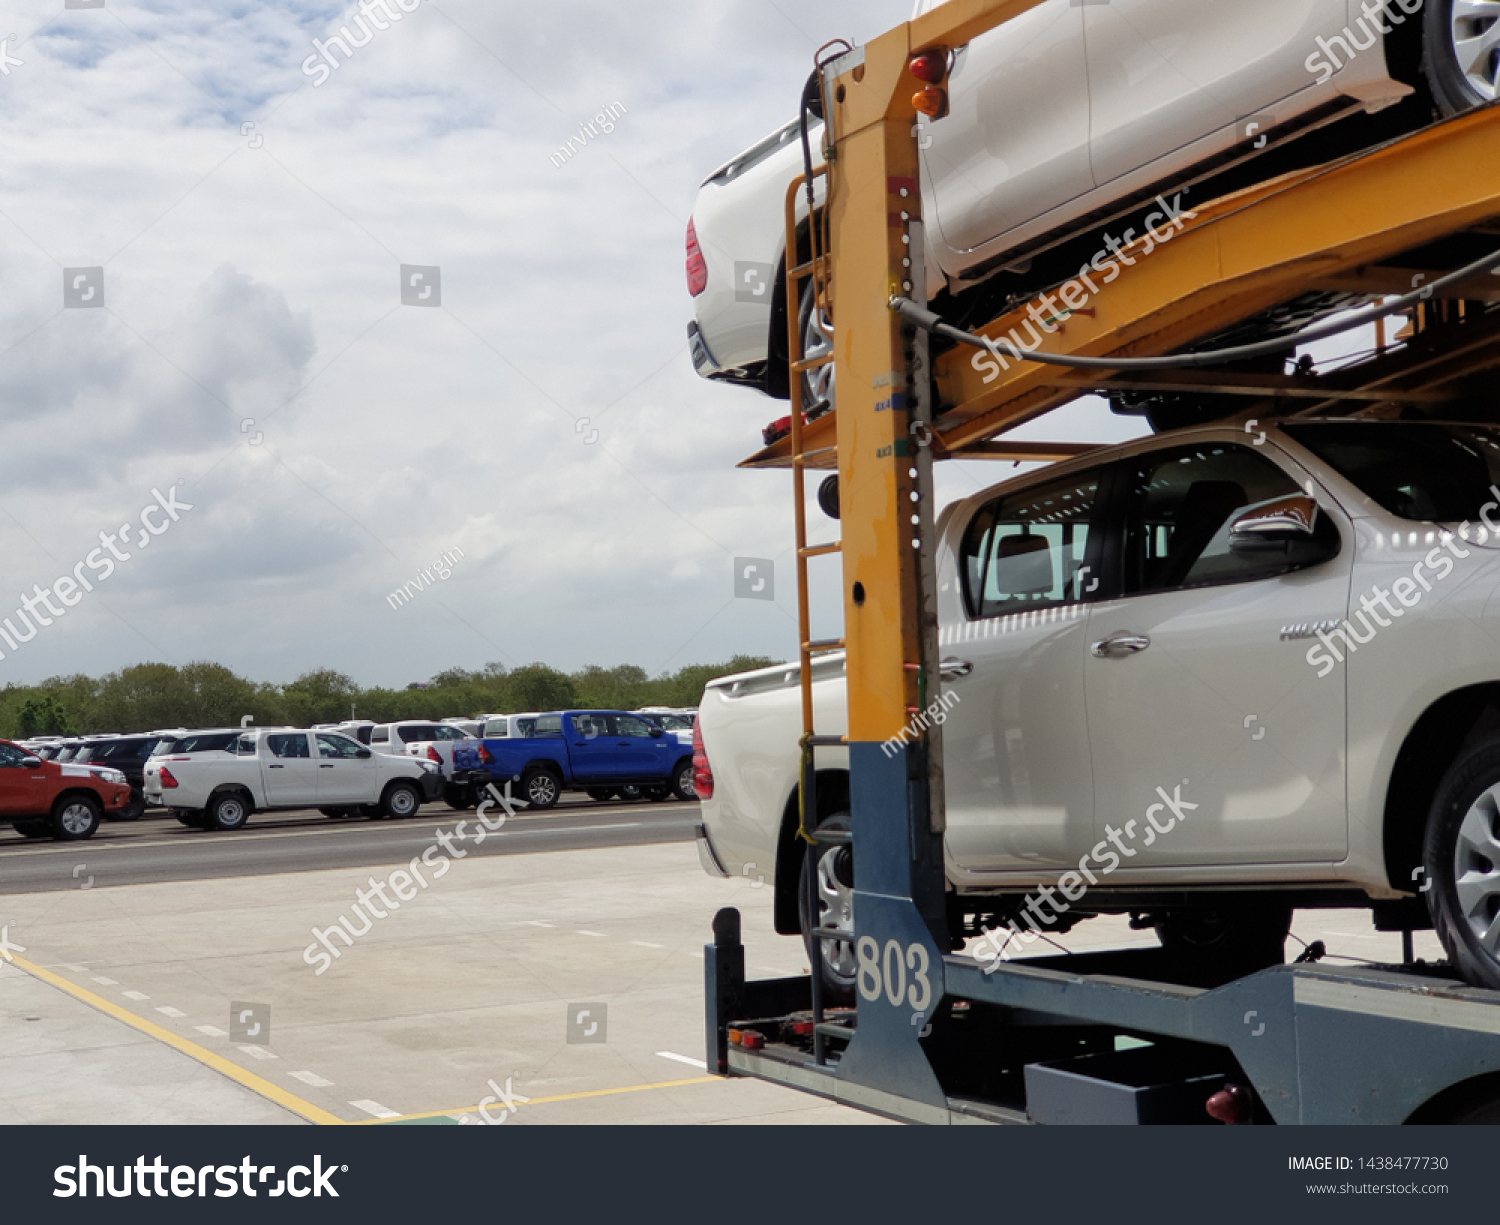 Chonburi, Thailand - July 1, 2019: New Toyota cars are parking in the yard and waiting to send to destination. Completed cars are waiting to move to destination. #1438477730